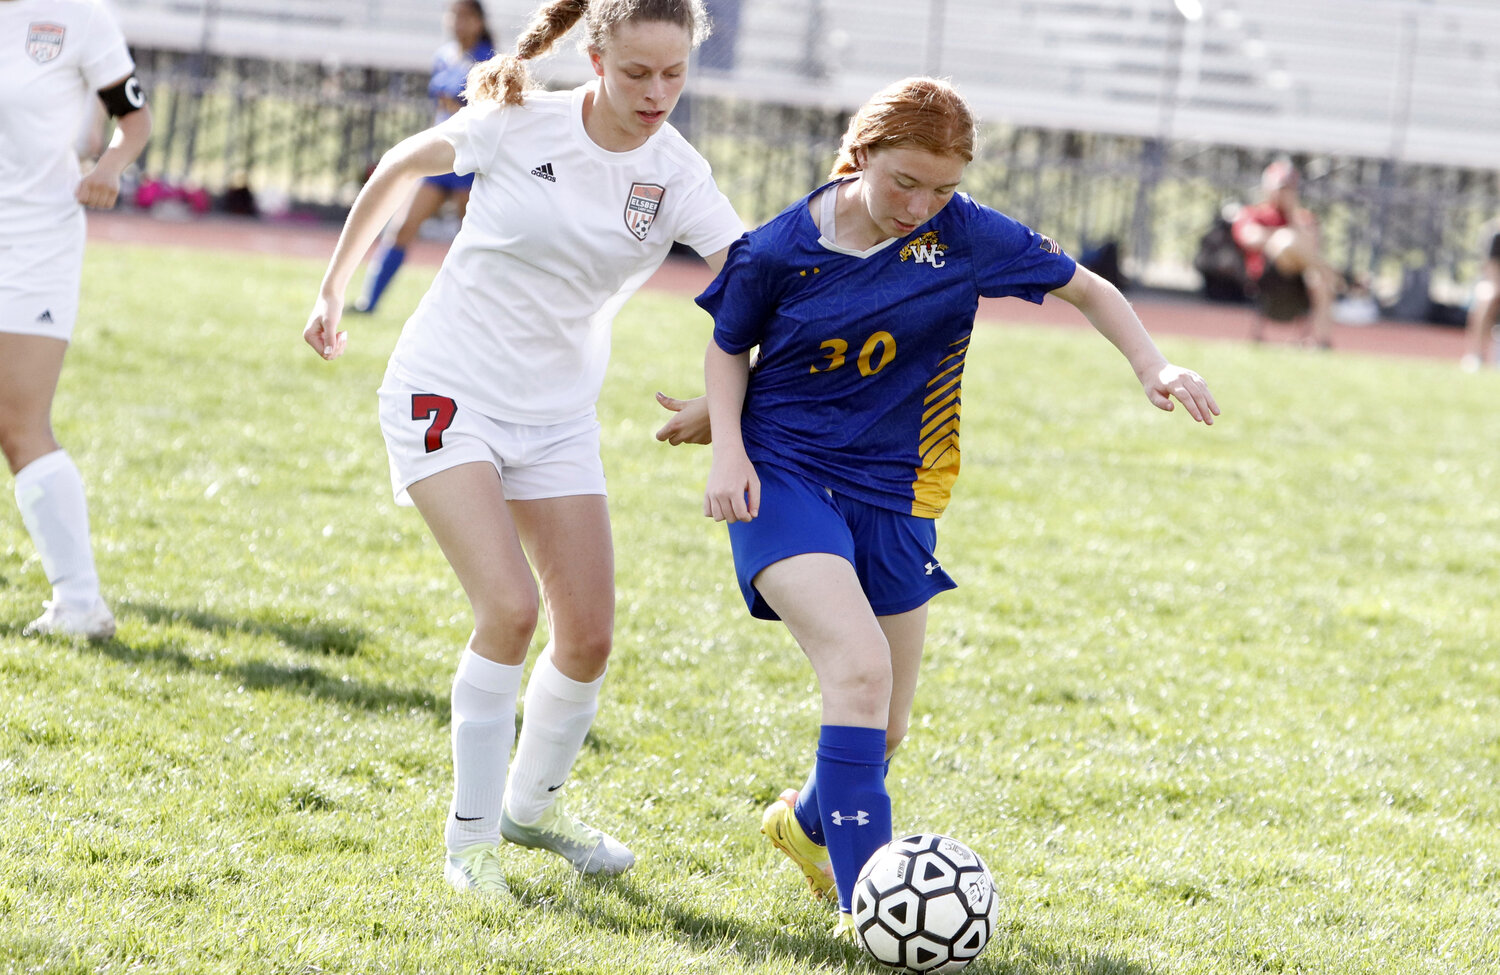 Sophomore Rylee Schaefer (right) attempts to get past an Eslberry defender during last week's game.